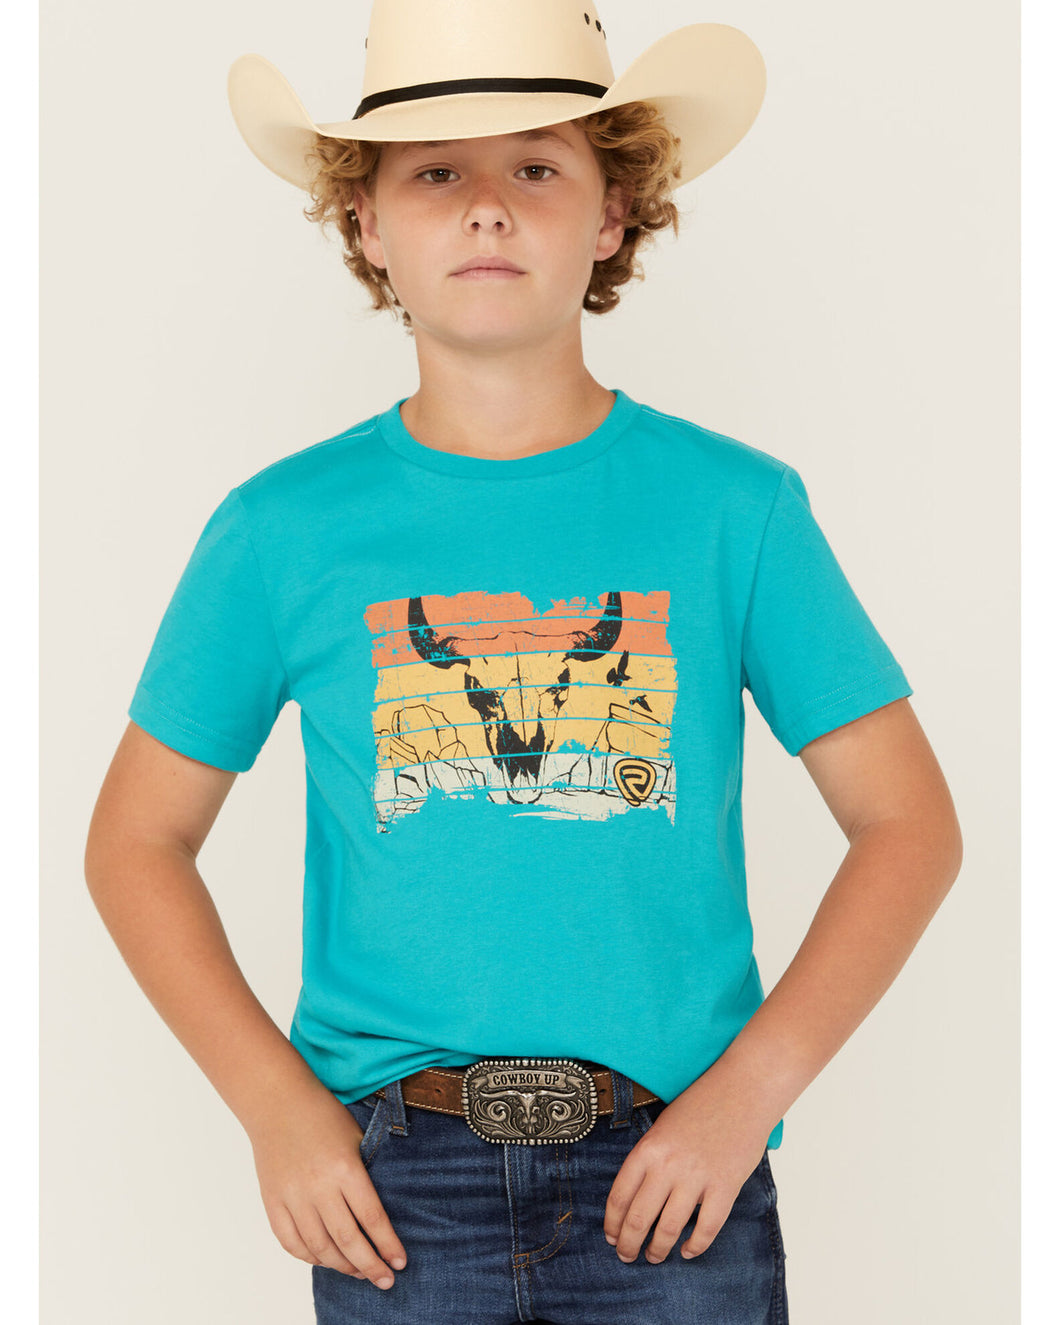 Boy's Graphic Tee by Rock & Roll ~ Turquoise - Henderson's Western Store